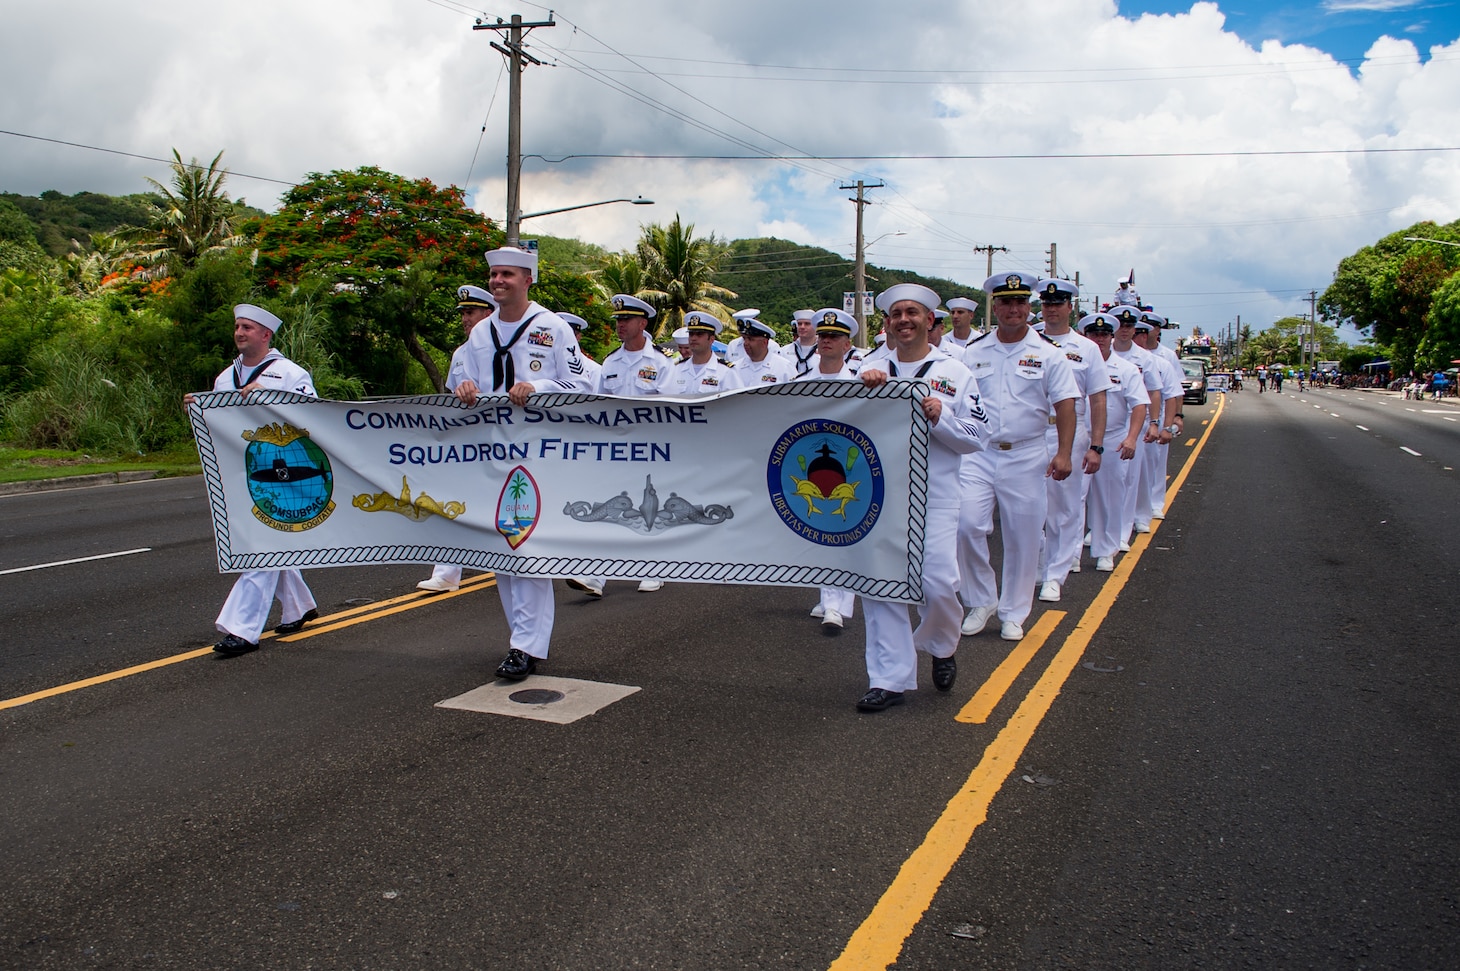 AGANA, Guam (July 21, 2019) Sailors assigned to Commander, Submarine Squadron Fifteen march in formation during the annual Liberation Day parade. The celebration commemorates the 75th anniversary of the liberation of Guam from Japanese occupation by U.S. forces during World War II.